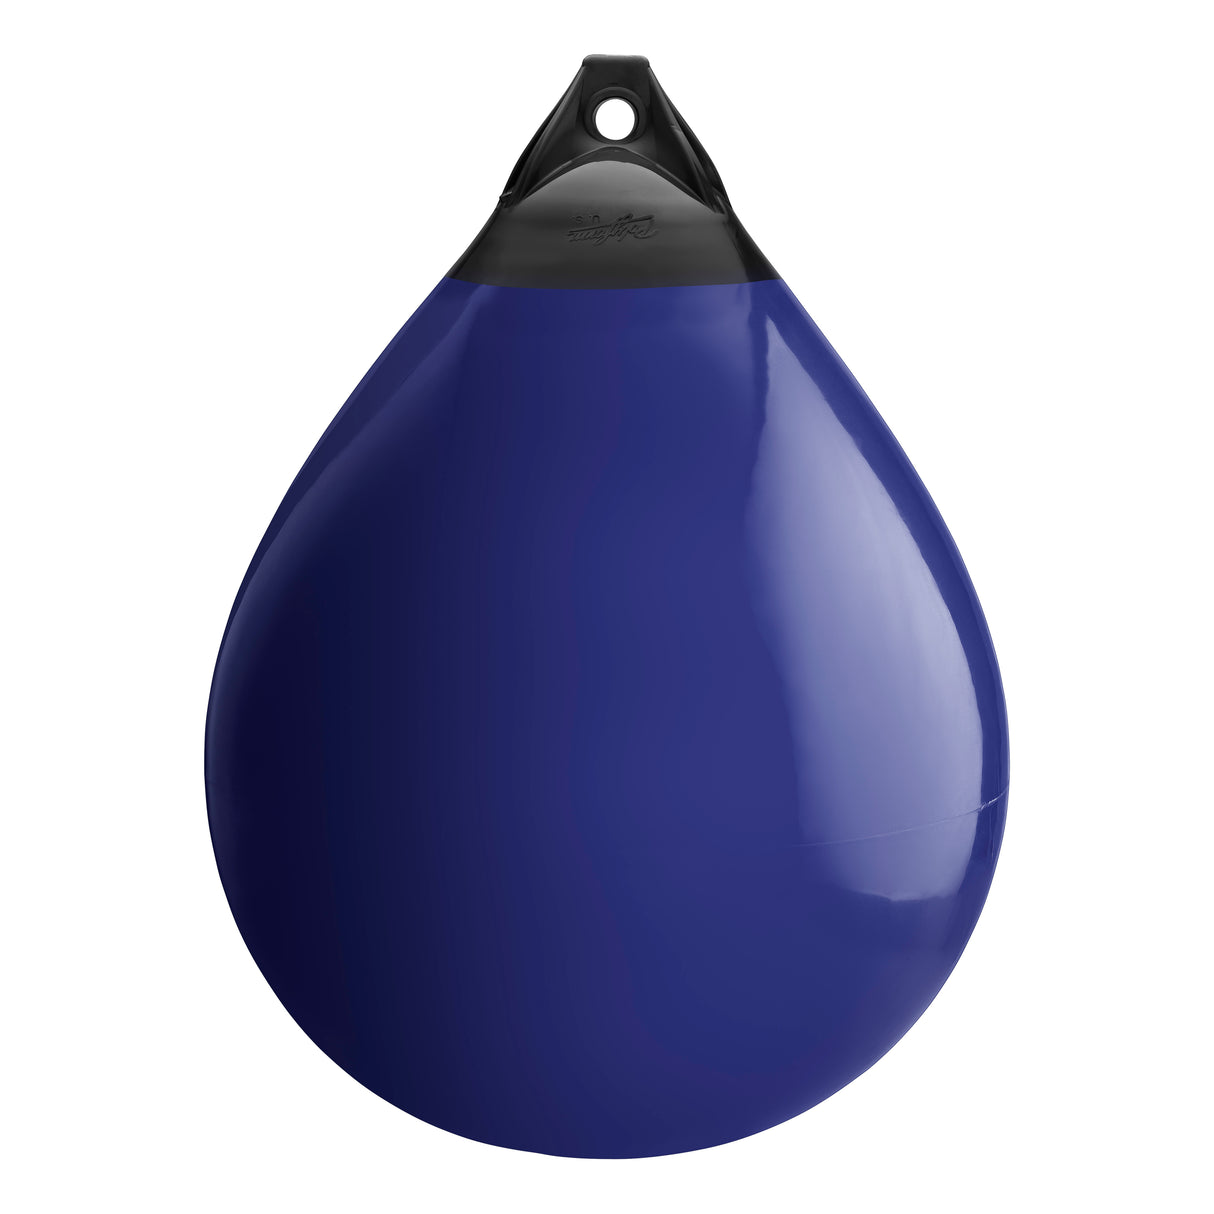 Navy Blue buoy with Black-Top, Polyform A-7